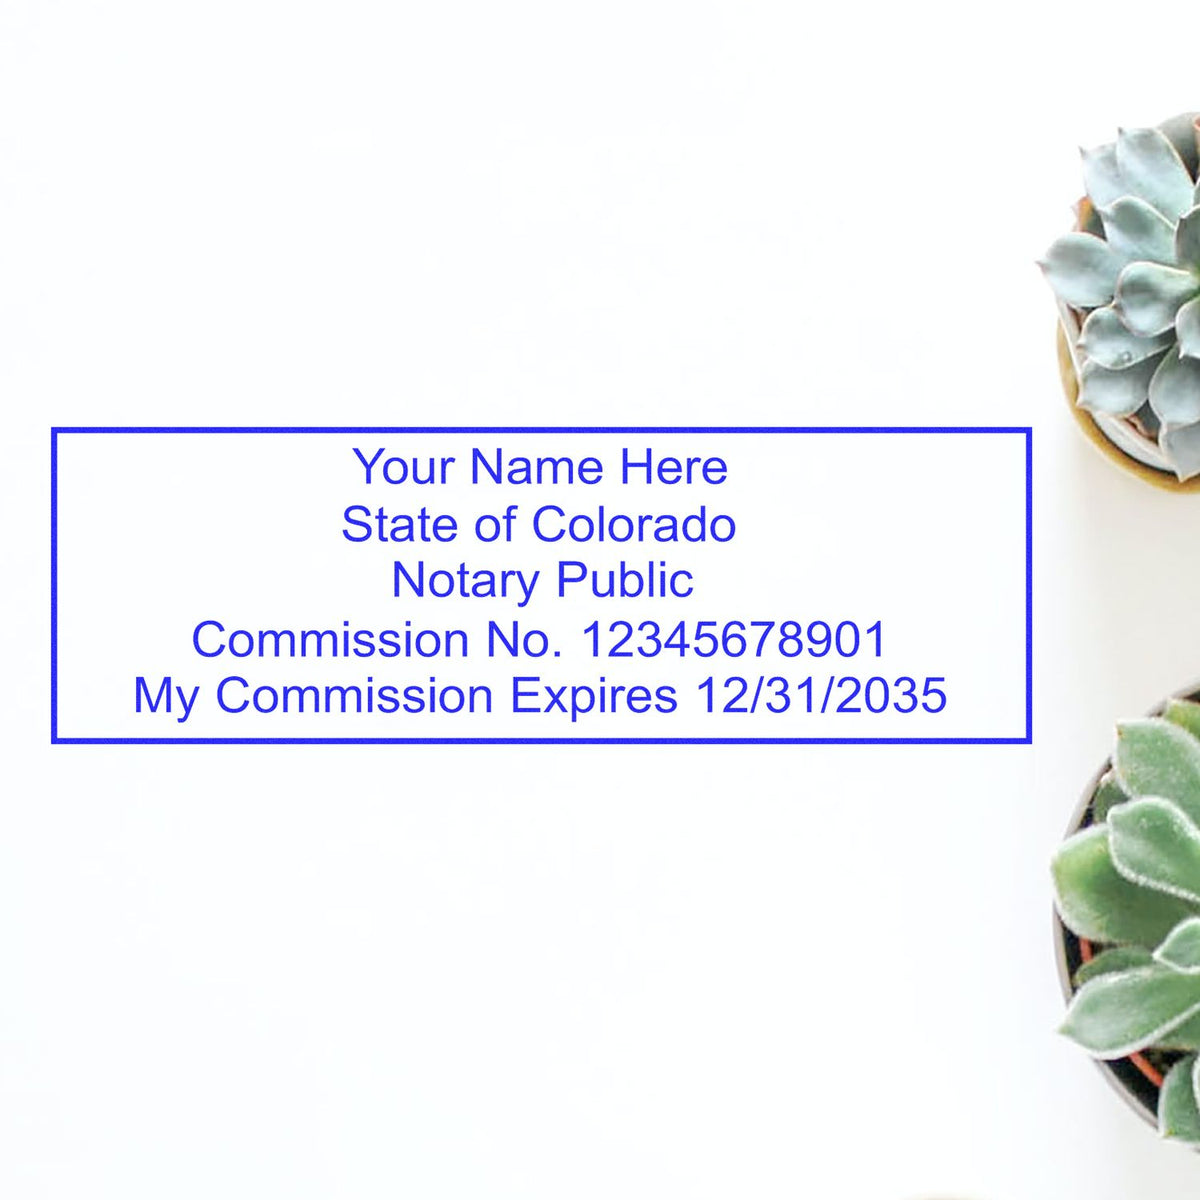 A lifestyle photo showing a stamped image of the Wooden Handle Colorado Rectangular Notary Public Stamp on a piece of paper